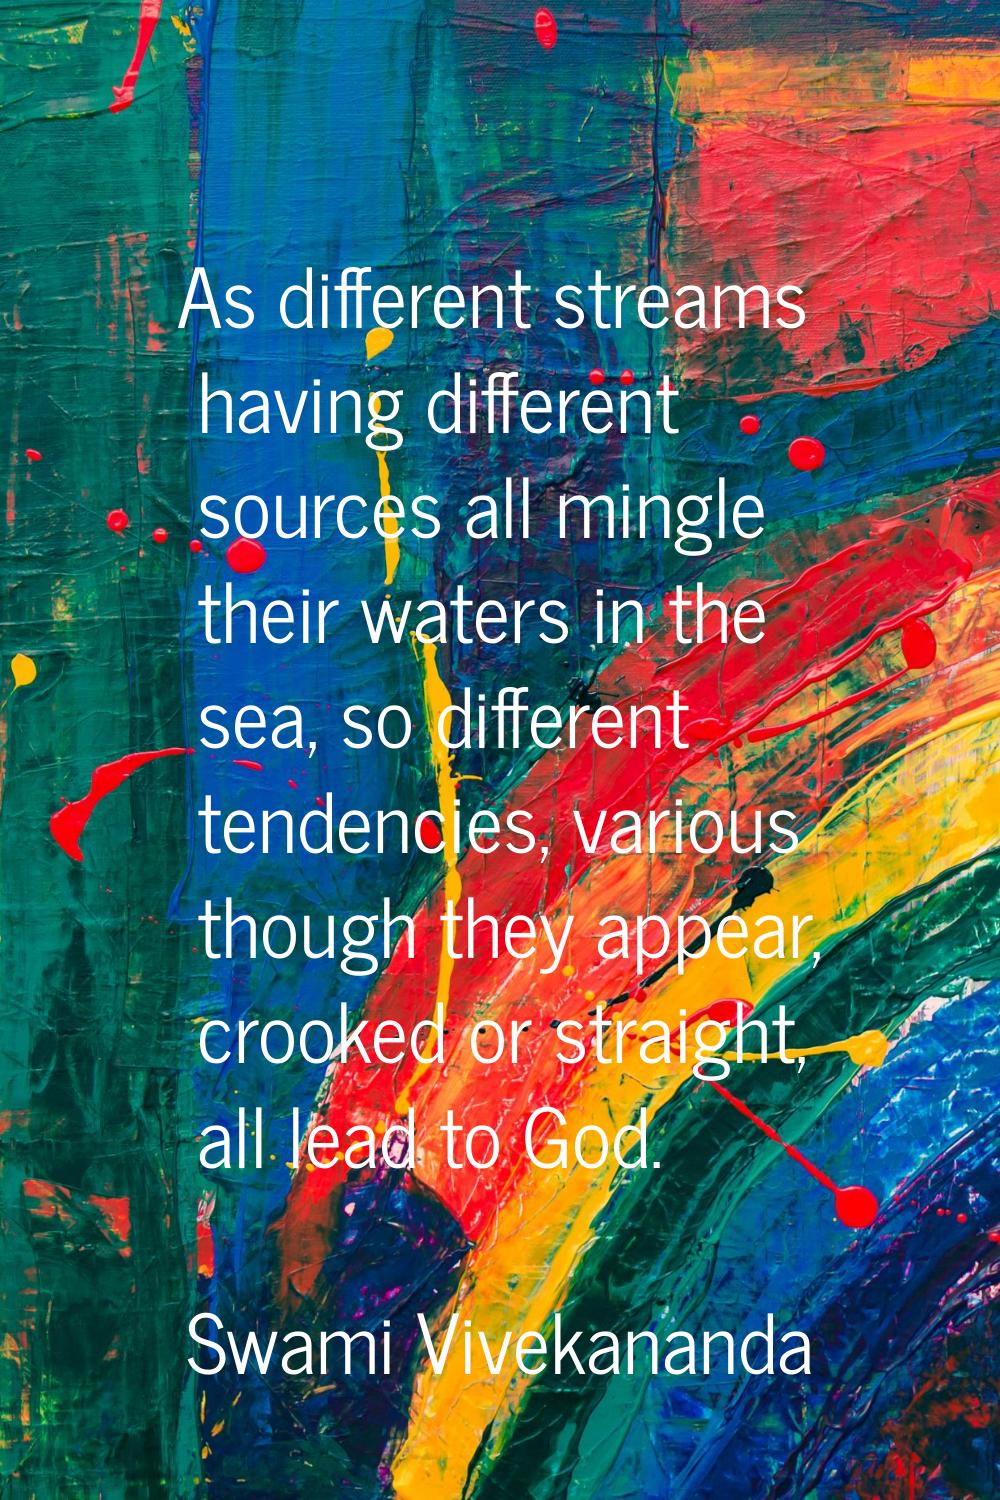 As different streams having different sources all mingle their waters in the sea, so different tend